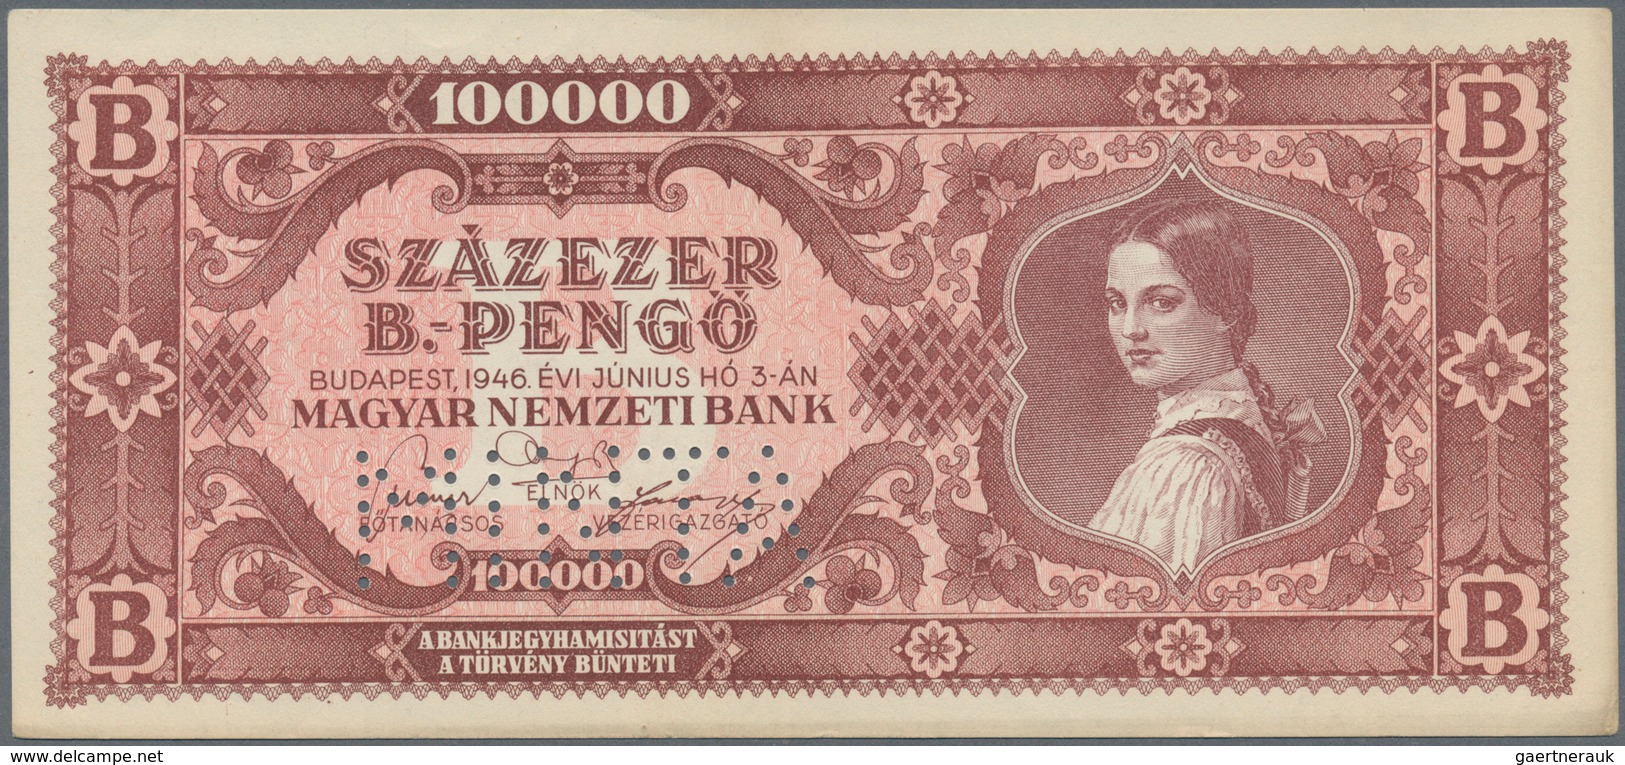 01708 Hungary / Ungarn: 100.000 B-Pengö 1946 Specimen, P.133s With Perforation "MINTA" With Lightly Toned - Hungary